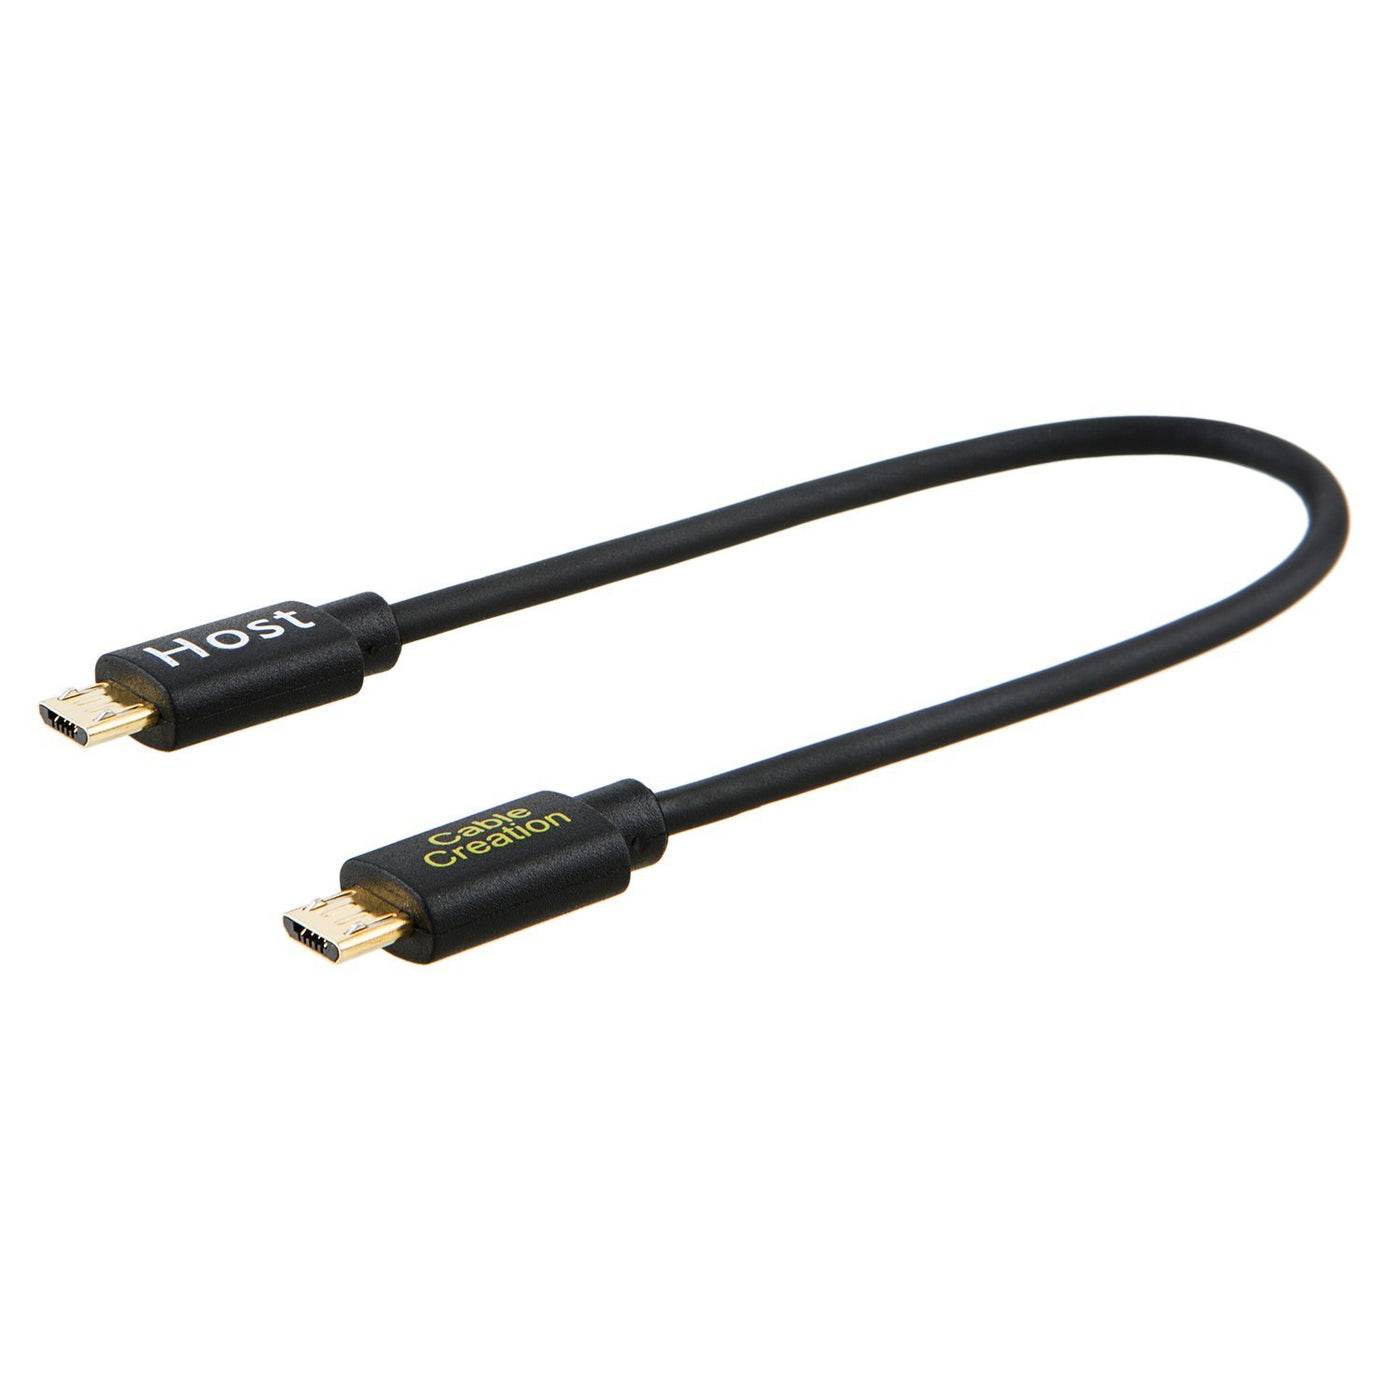 Kejser Wetland delvist Micro USB to Micro USB OTG Cable – CableCreation